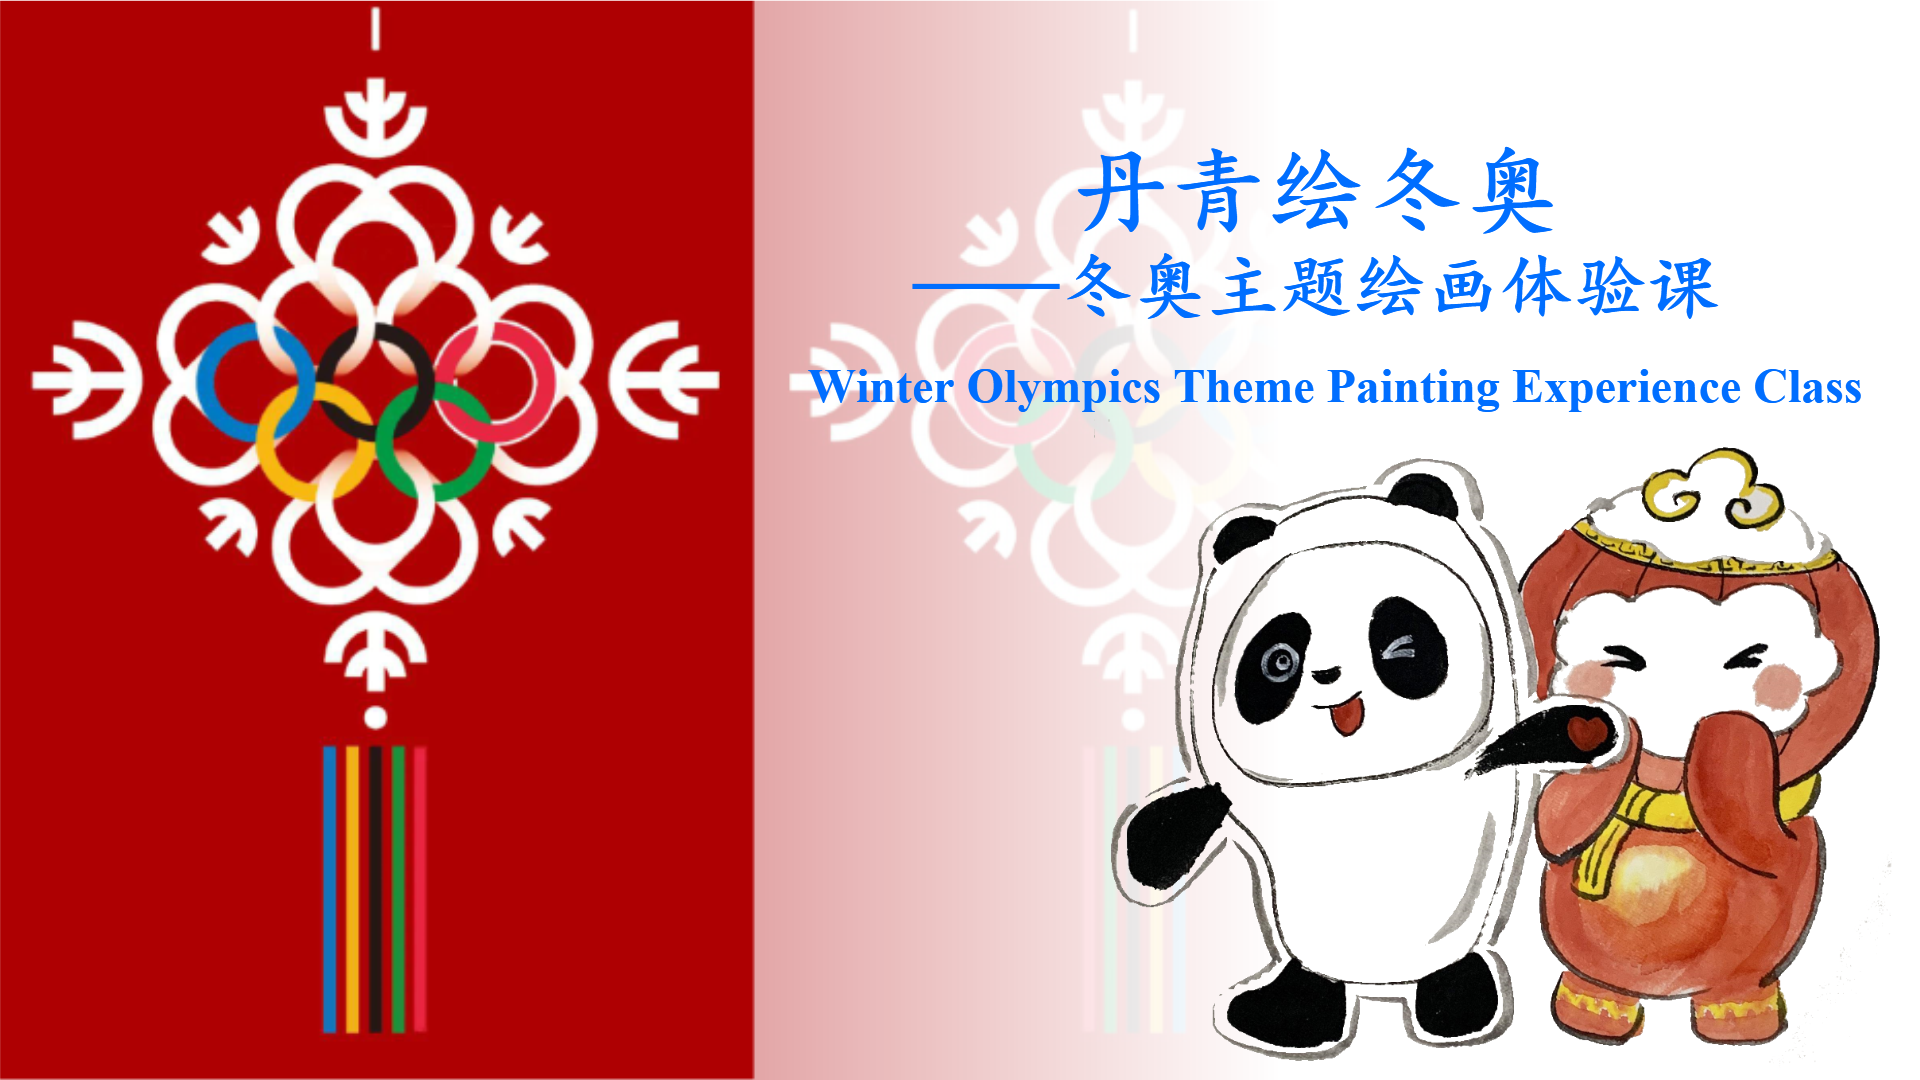 Chinese Painting Experience Class on the theme of Winter Olympics